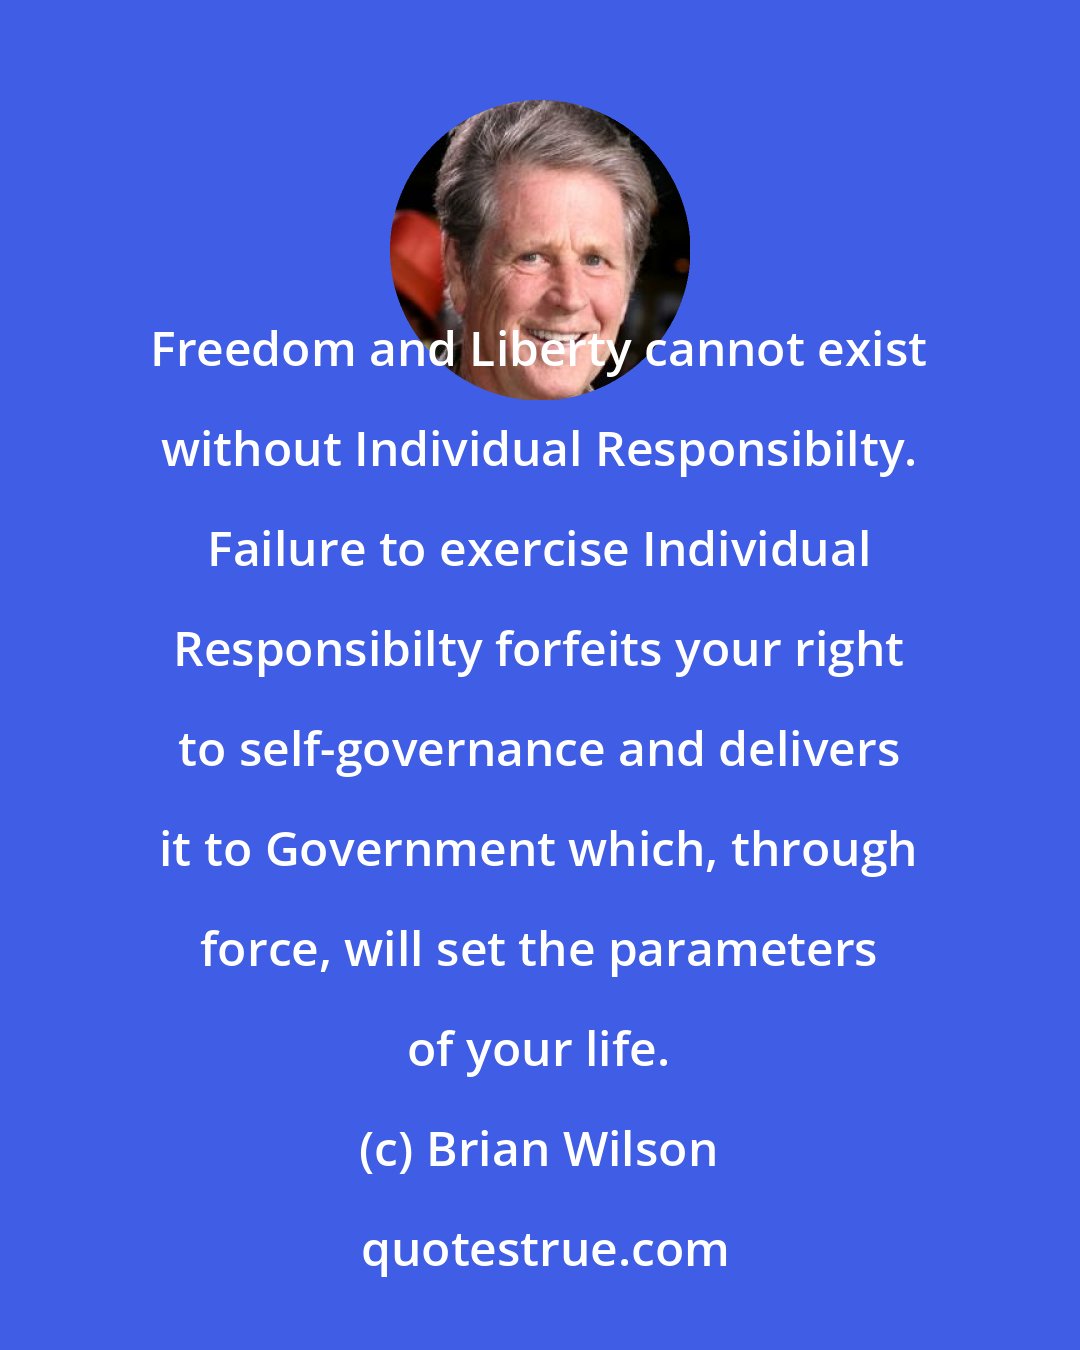 Brian Wilson: Freedom and Liberty cannot exist without Individual Responsibilty. Failure to exercise Individual Responsibilty forfeits your right to self-governance and delivers it to Government which, through force, will set the parameters of your life.